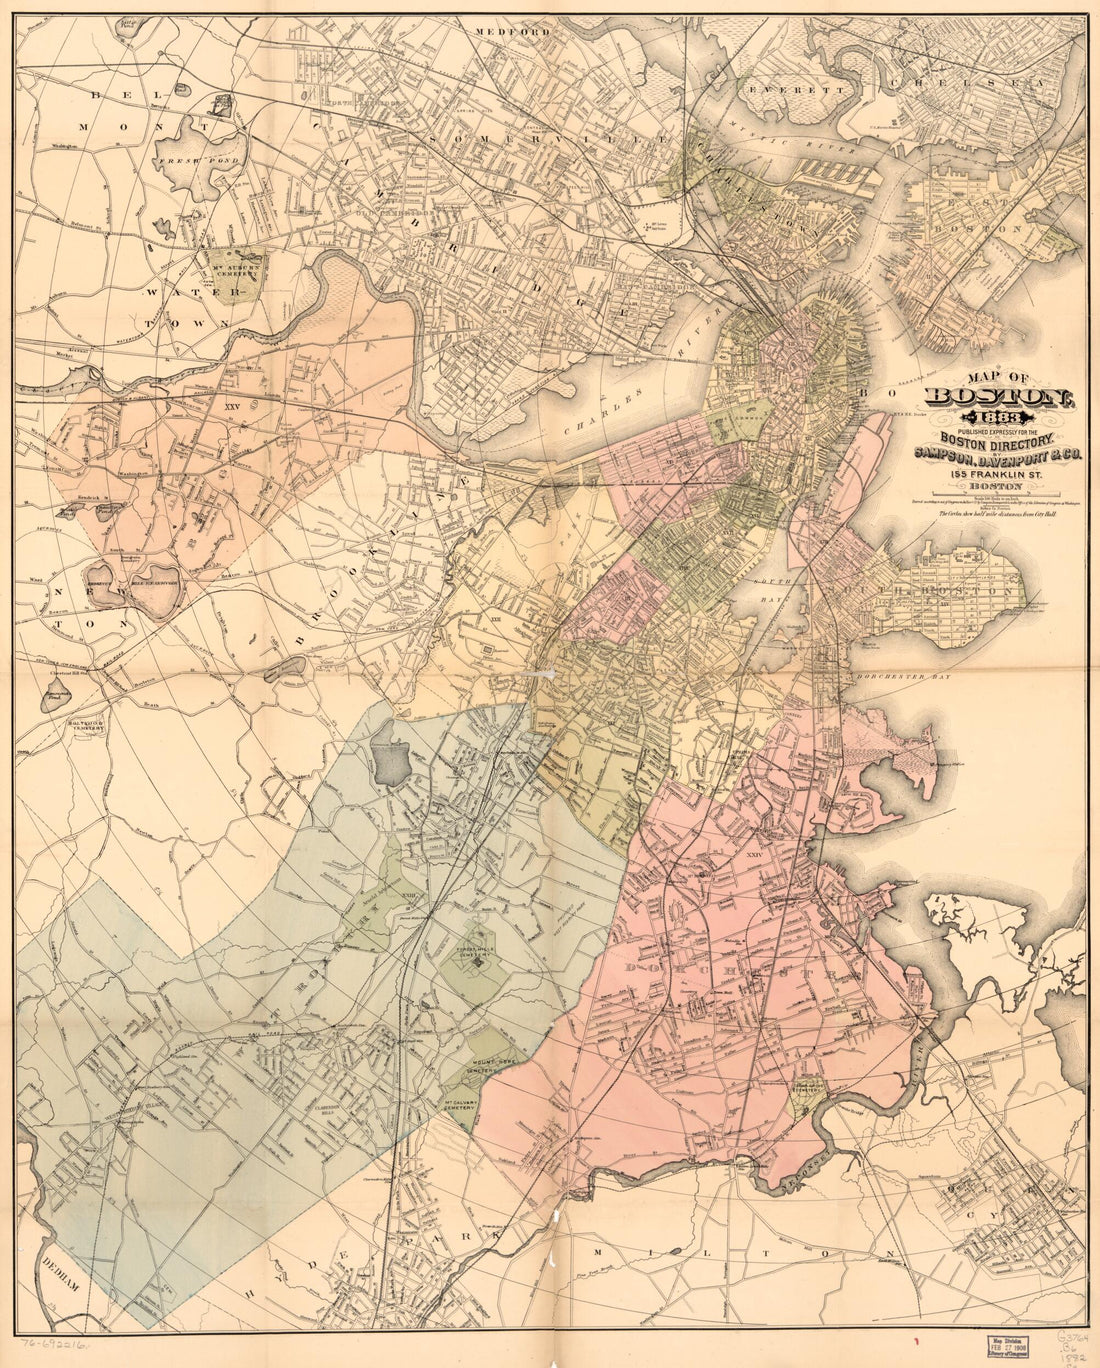 This old map of Map of Boston for from 1883 was created by Davenport &amp; Co Sampson in 1883